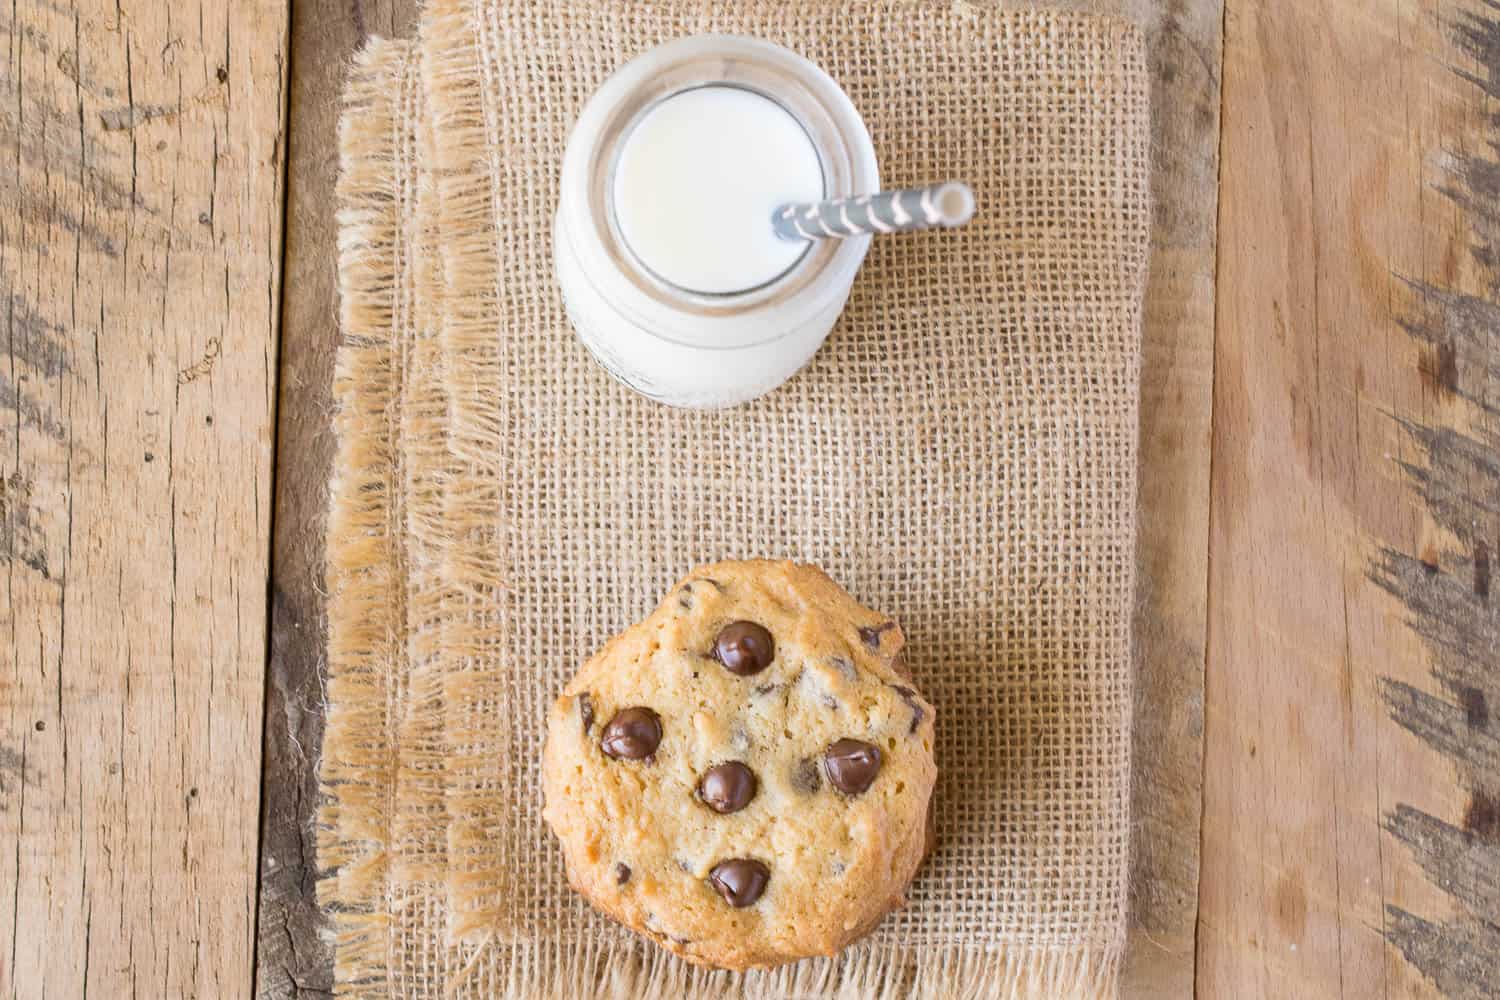 A cookie and bottle of milk from overhead ready to enjoy